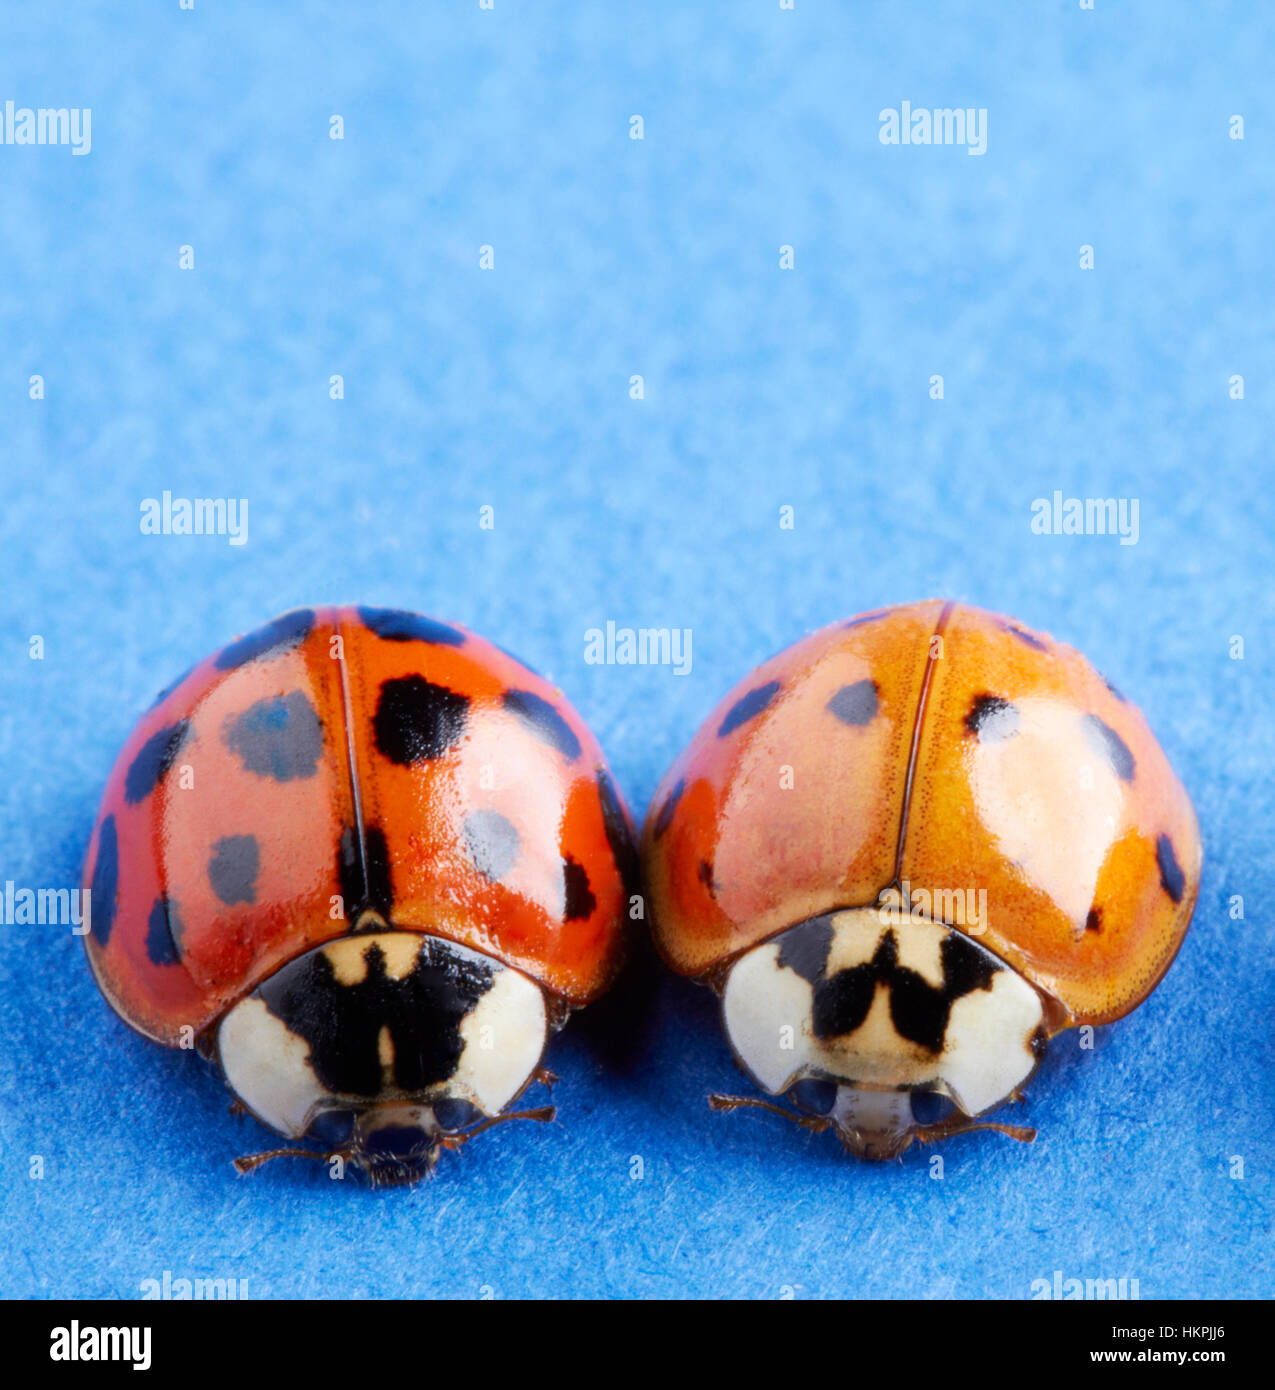 A macro image of two spotted ladybug or ladybird insects, one red and one orange on a contrasting blue paper surface. Stock Photo